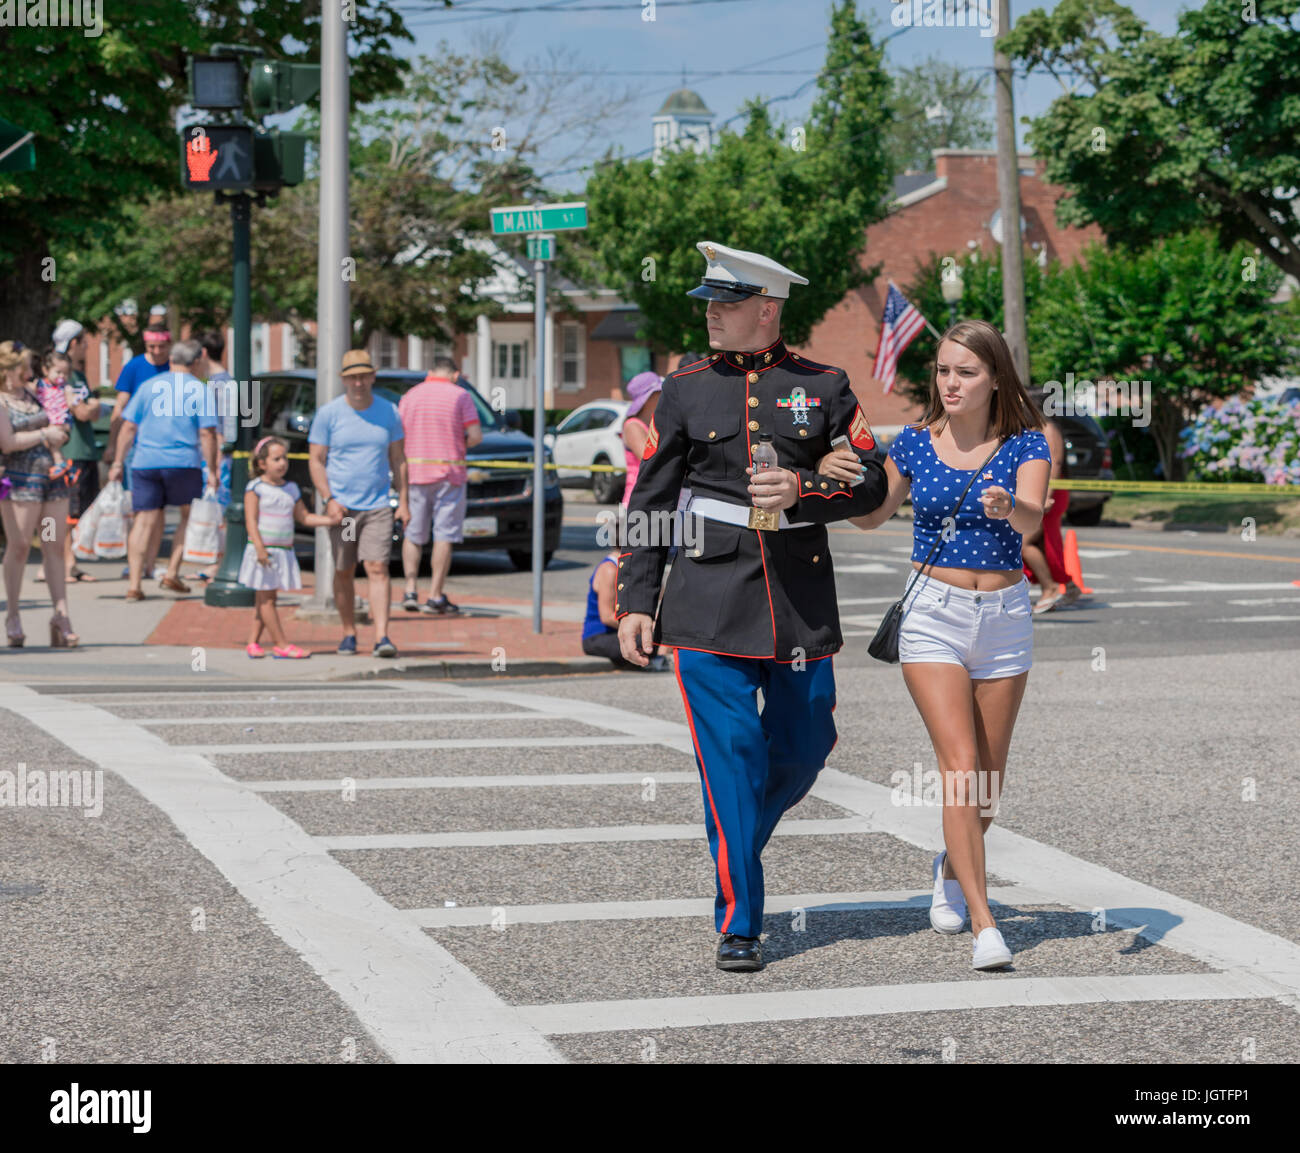 man in military uniform with woman crossing the street in Southampton, ny during a fourth of july parade Stock Photo